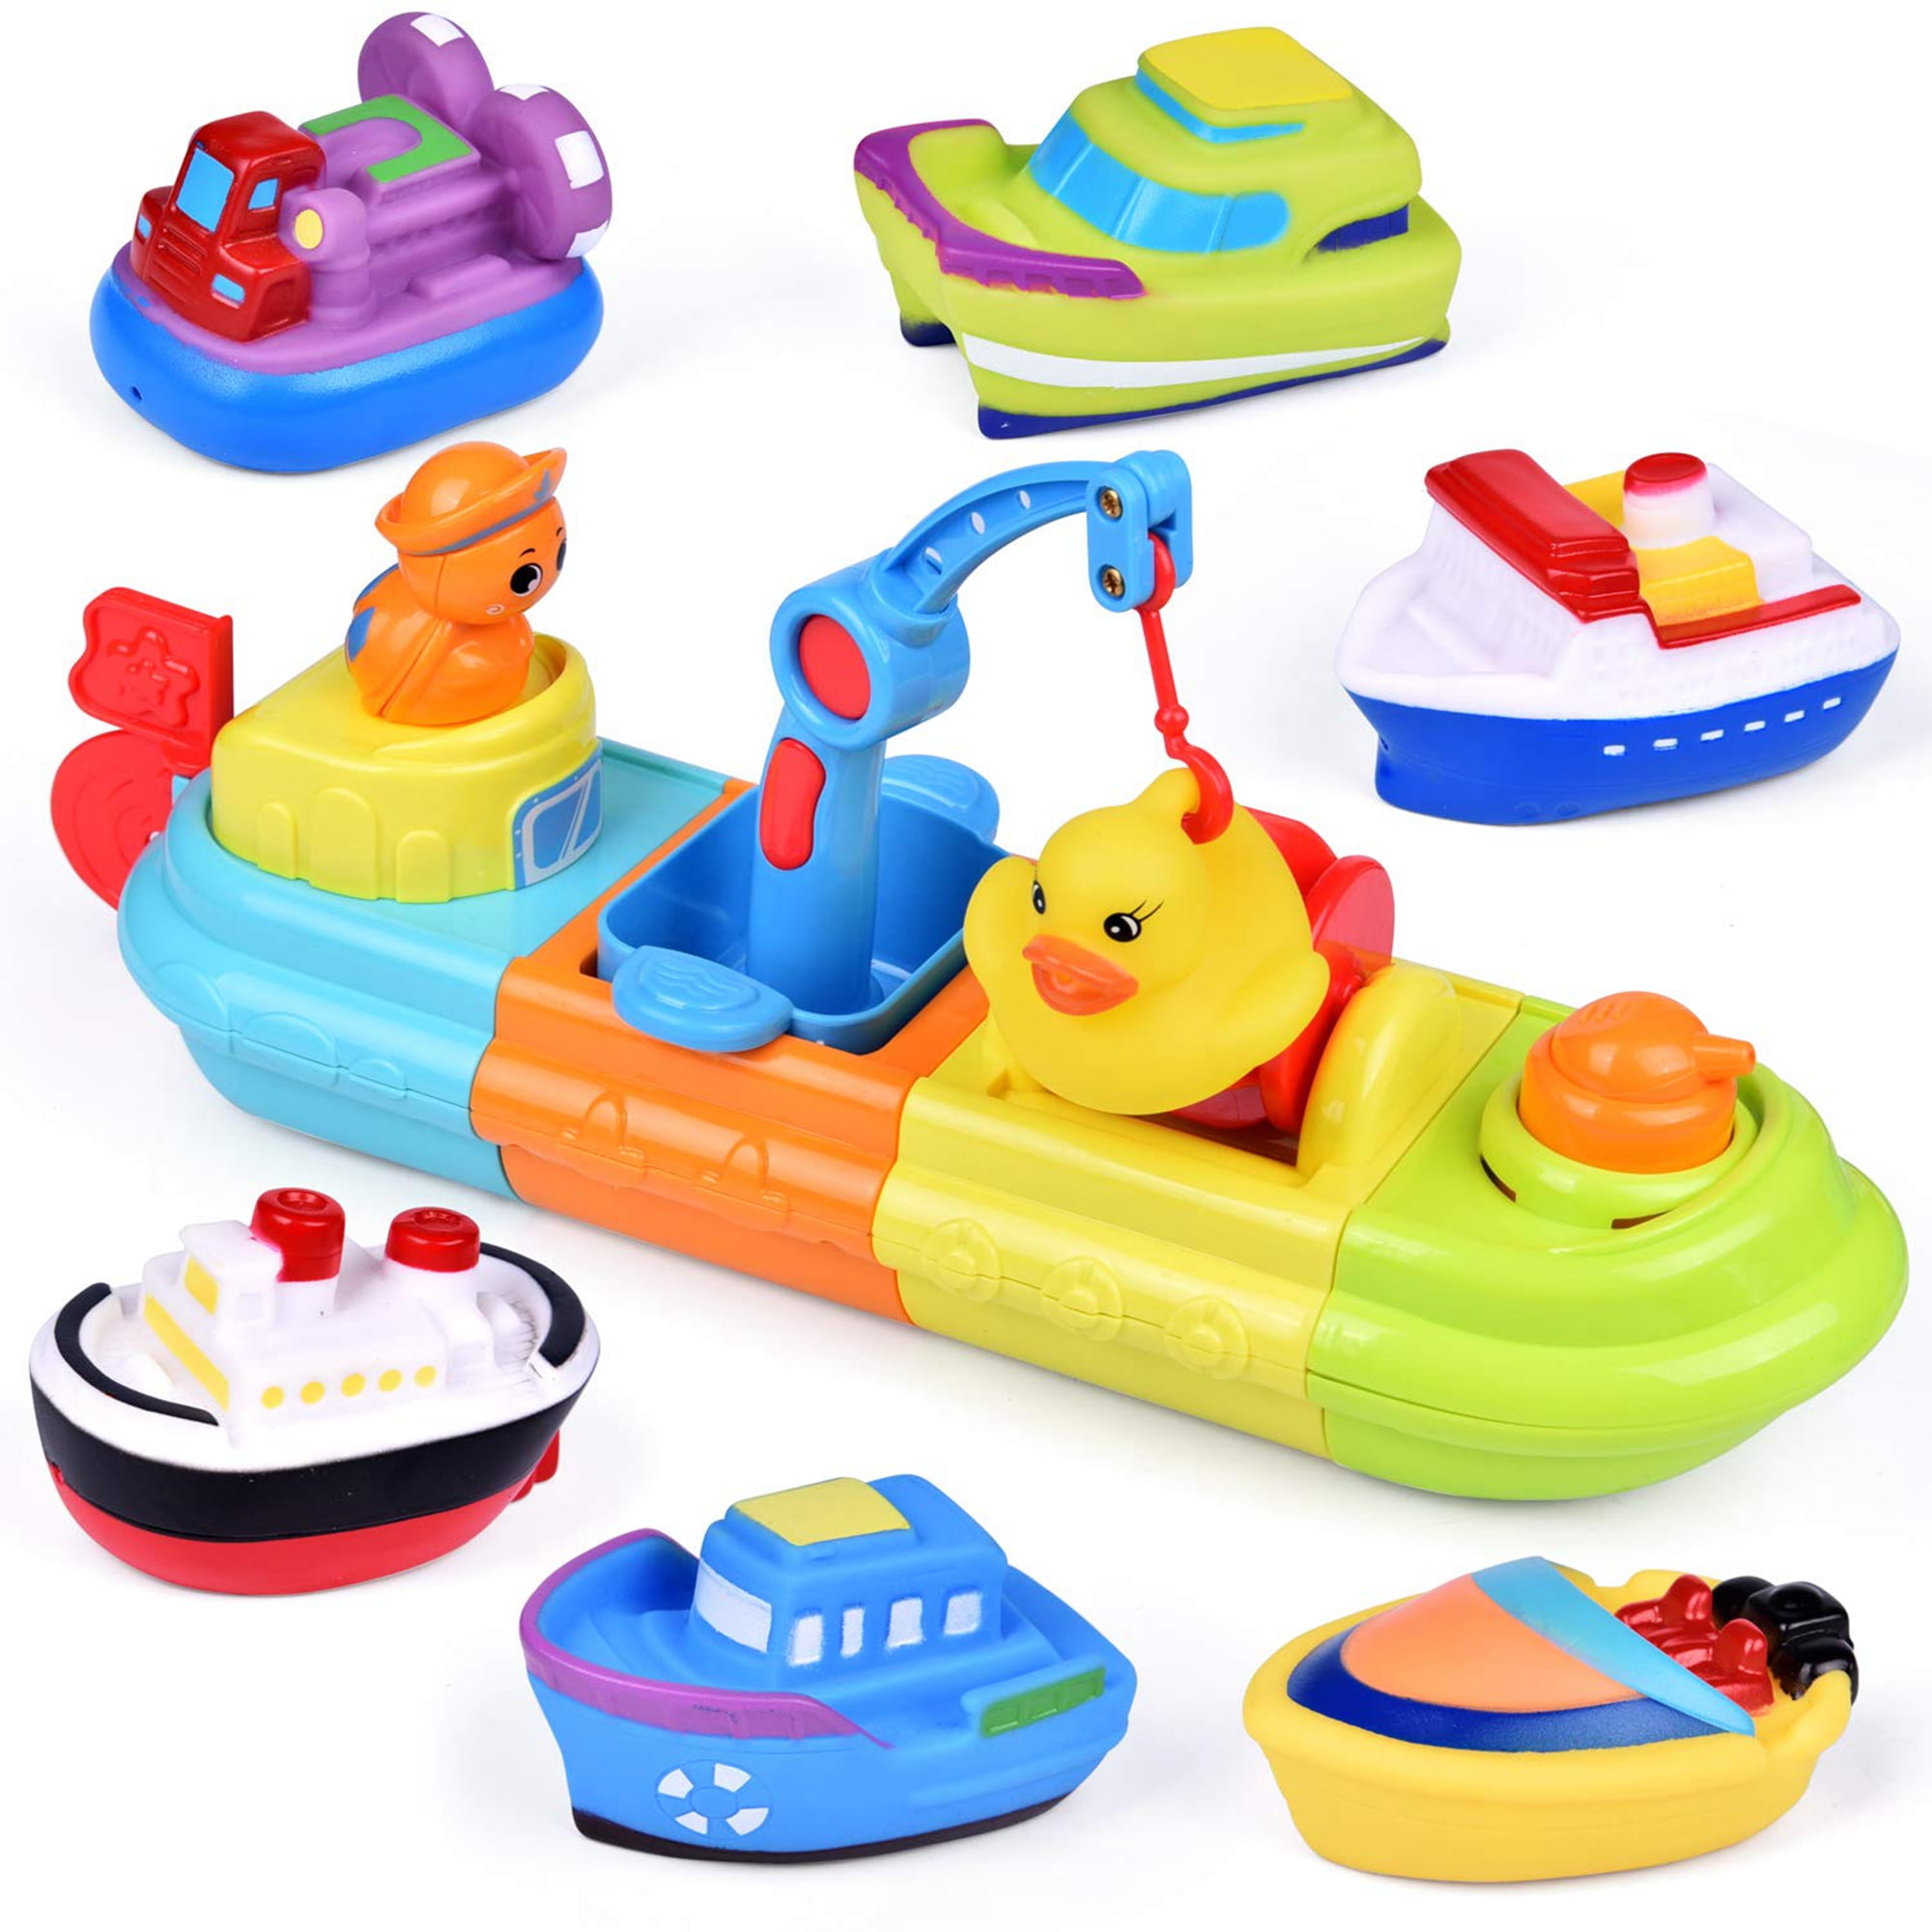 Yellow Wind Up Water Cruiser/ Speed Boat Toy Great Fun in Tub or Pool Summer 